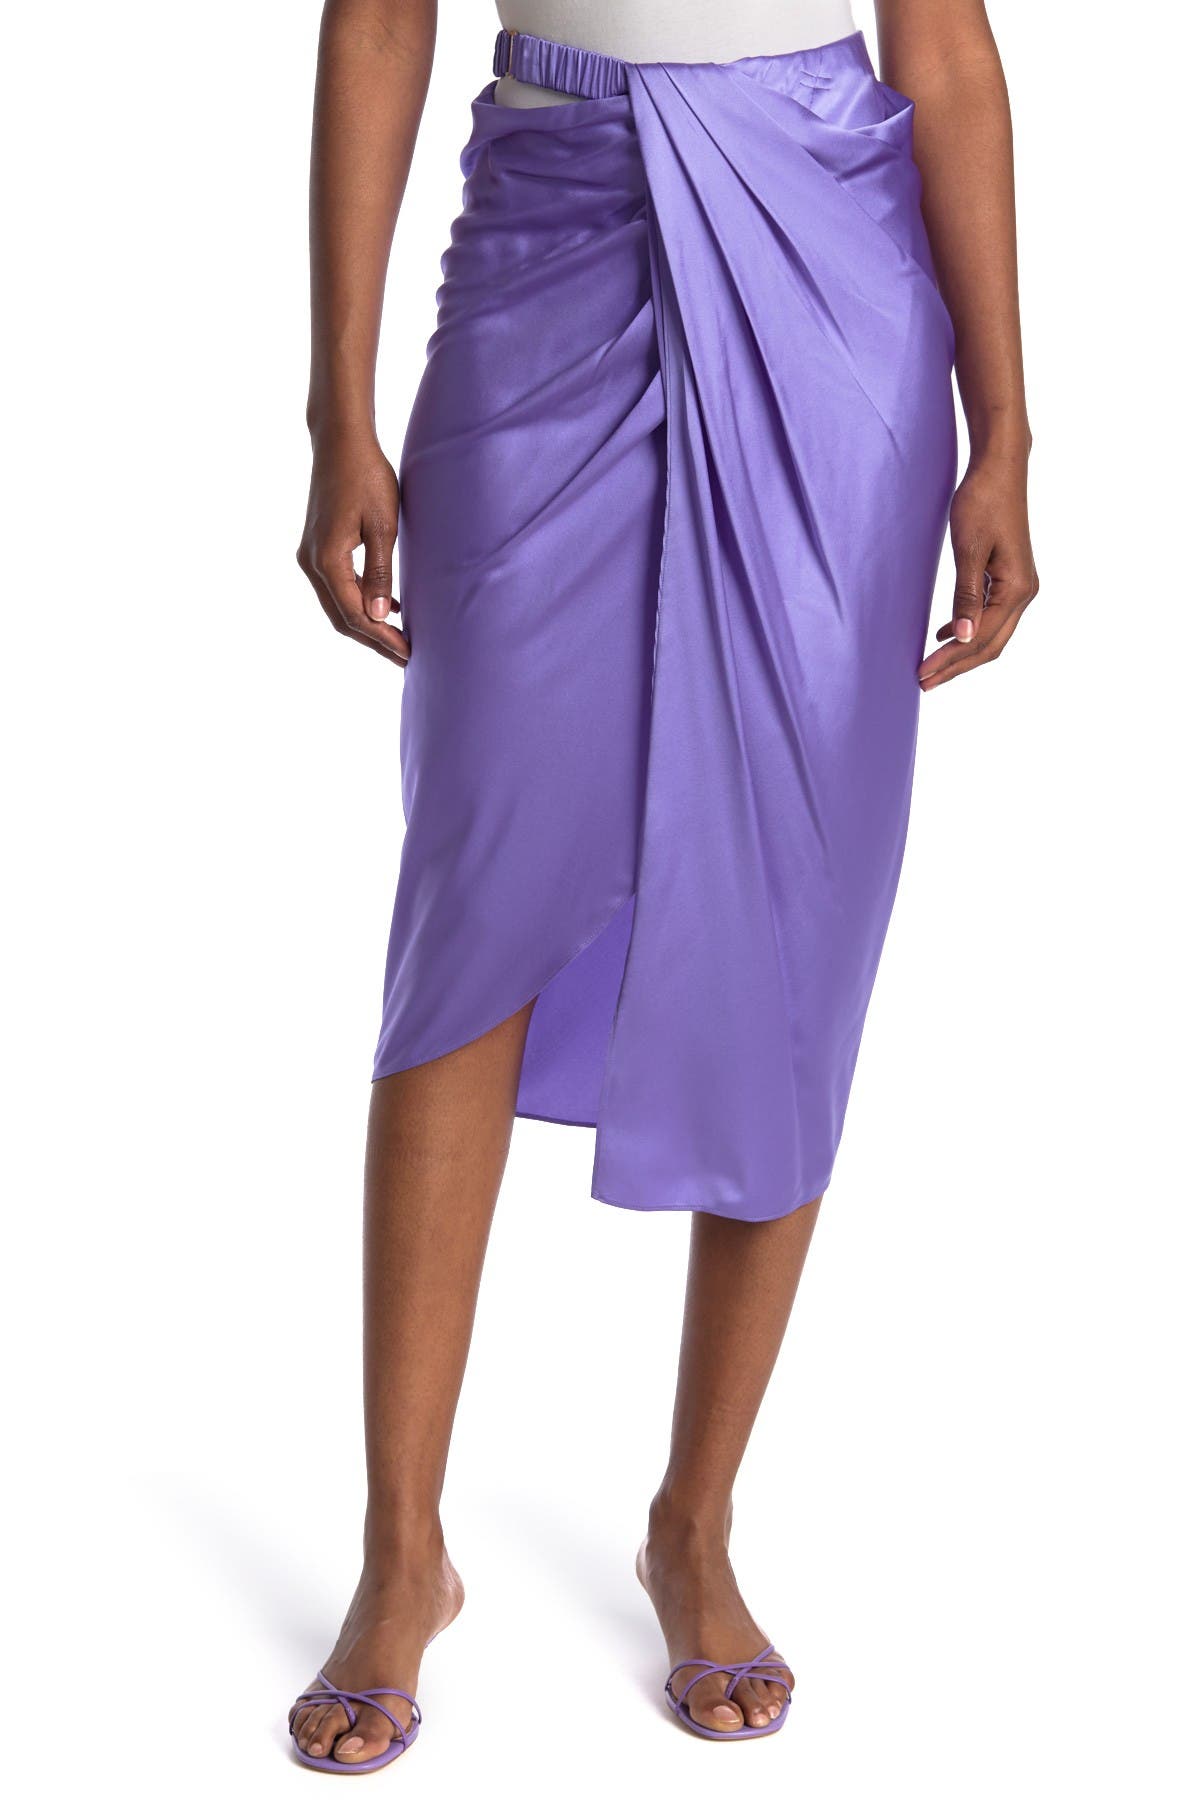 HELMUT LANG RUCHED STRETCH SILK SKIRT,883389783906